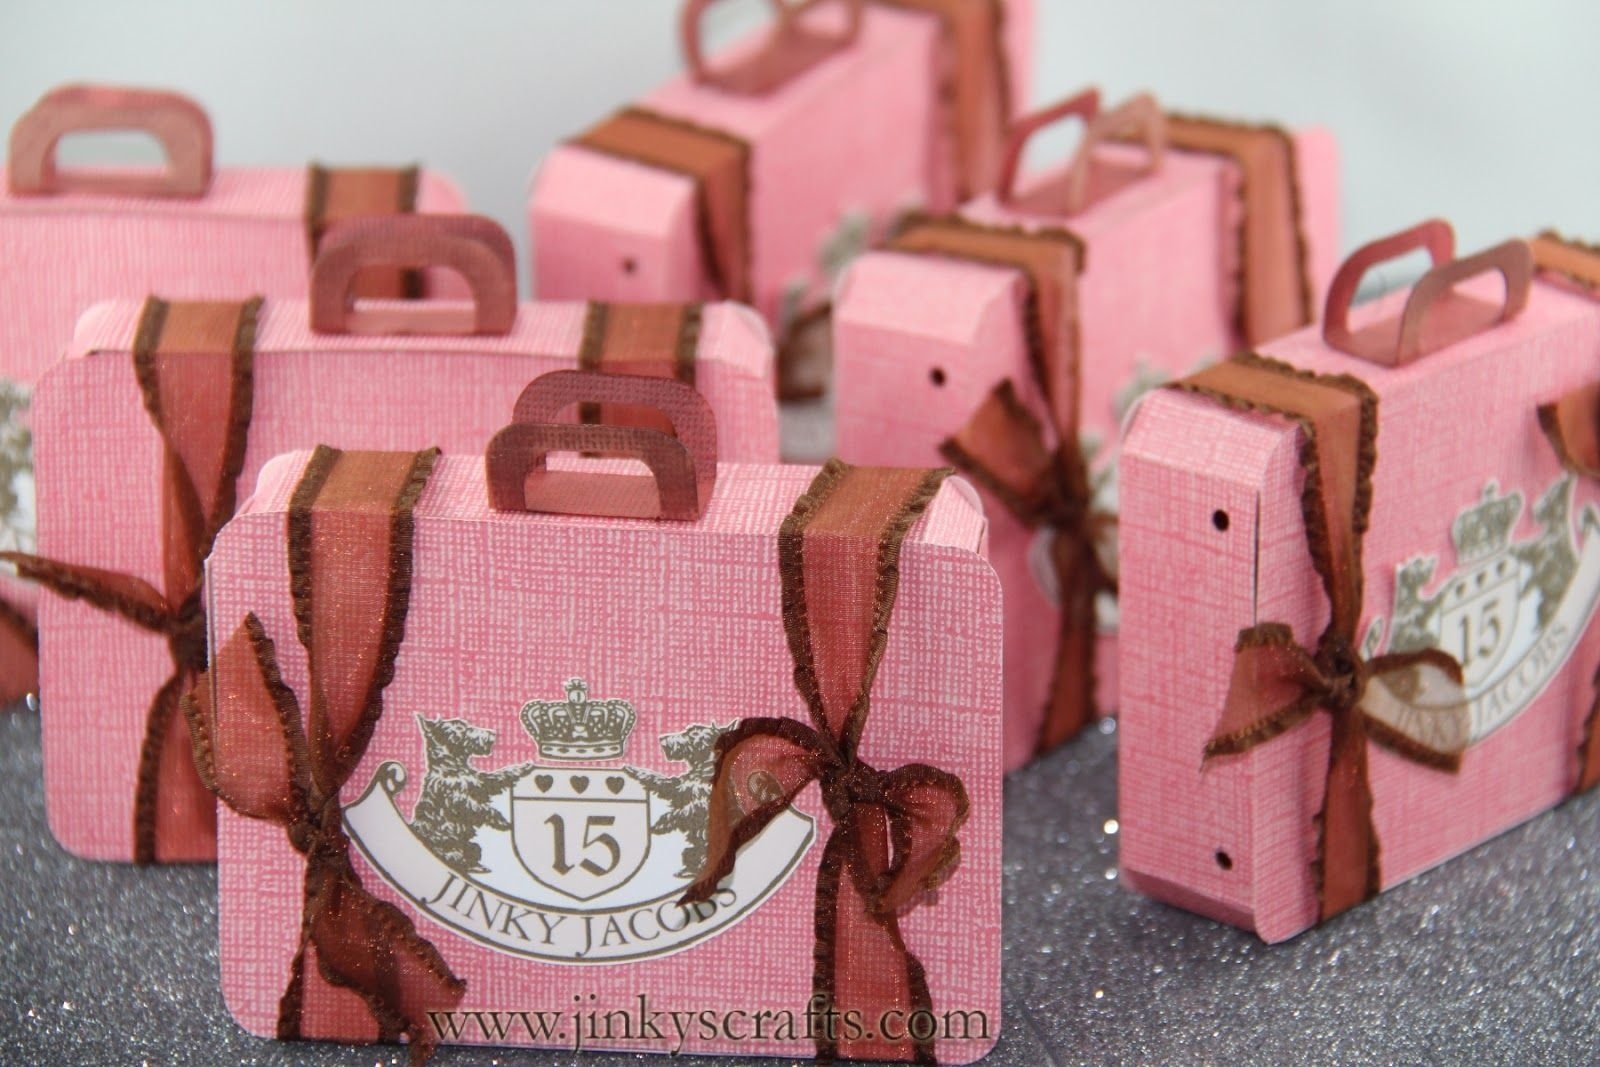 10 Elegant Sweet 16 Party Favors Ideas sweet 16 party ideas sweet 16 parties sweet 16 and sweet sixteen 1 2023